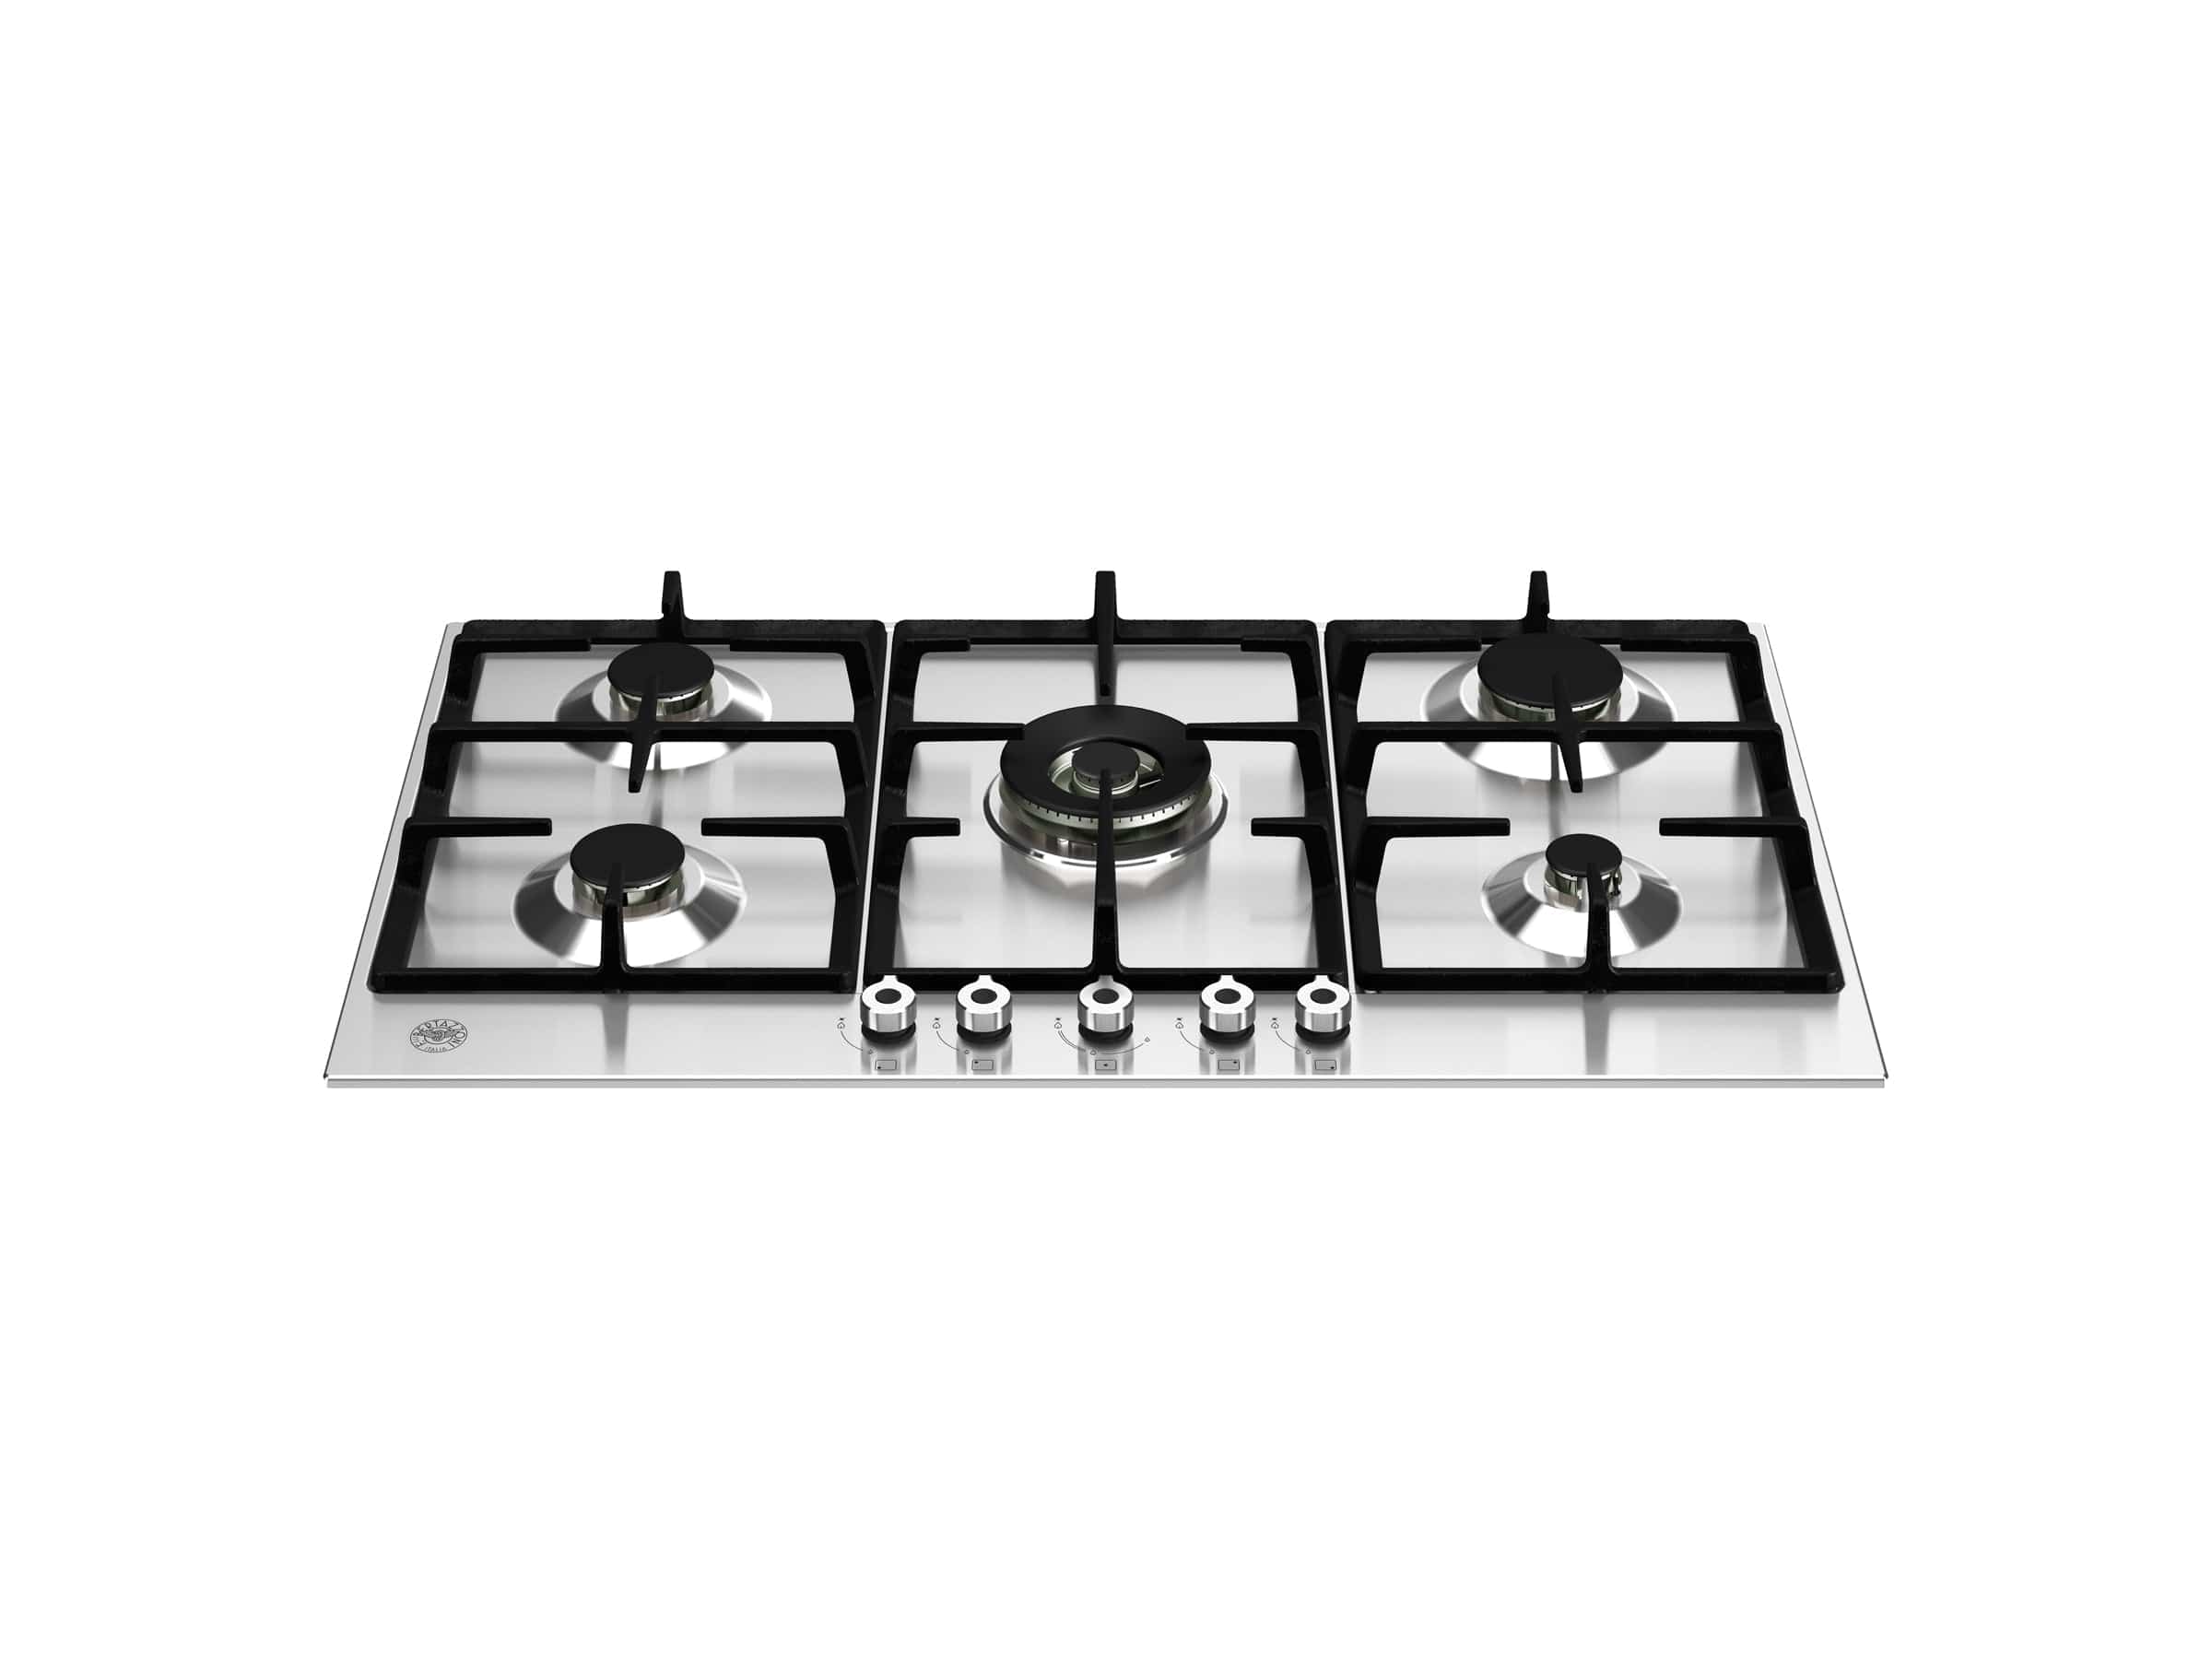 Bertazzoni Professional Series 36" 5 Aluminum Burners Stainless Steel Front Control Gas Cooktop PROF365CTXV Luxury Appliances Direct